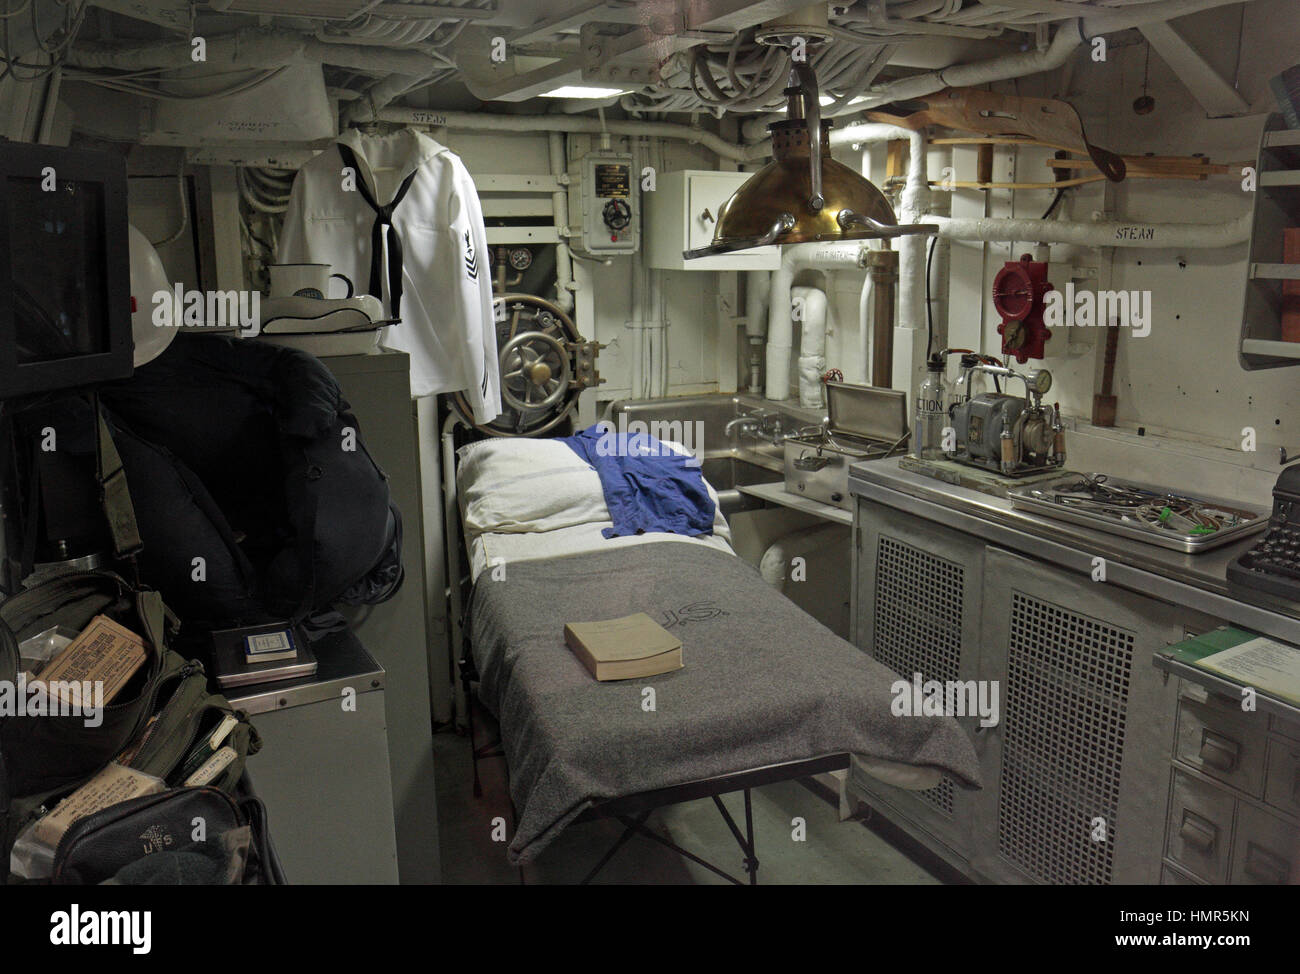 Operating room/theater on the USS Cassin Young, Boston National Historical Park, Charlestown Navy Yard, Boston, Massachusetts, United States. Stock Photo